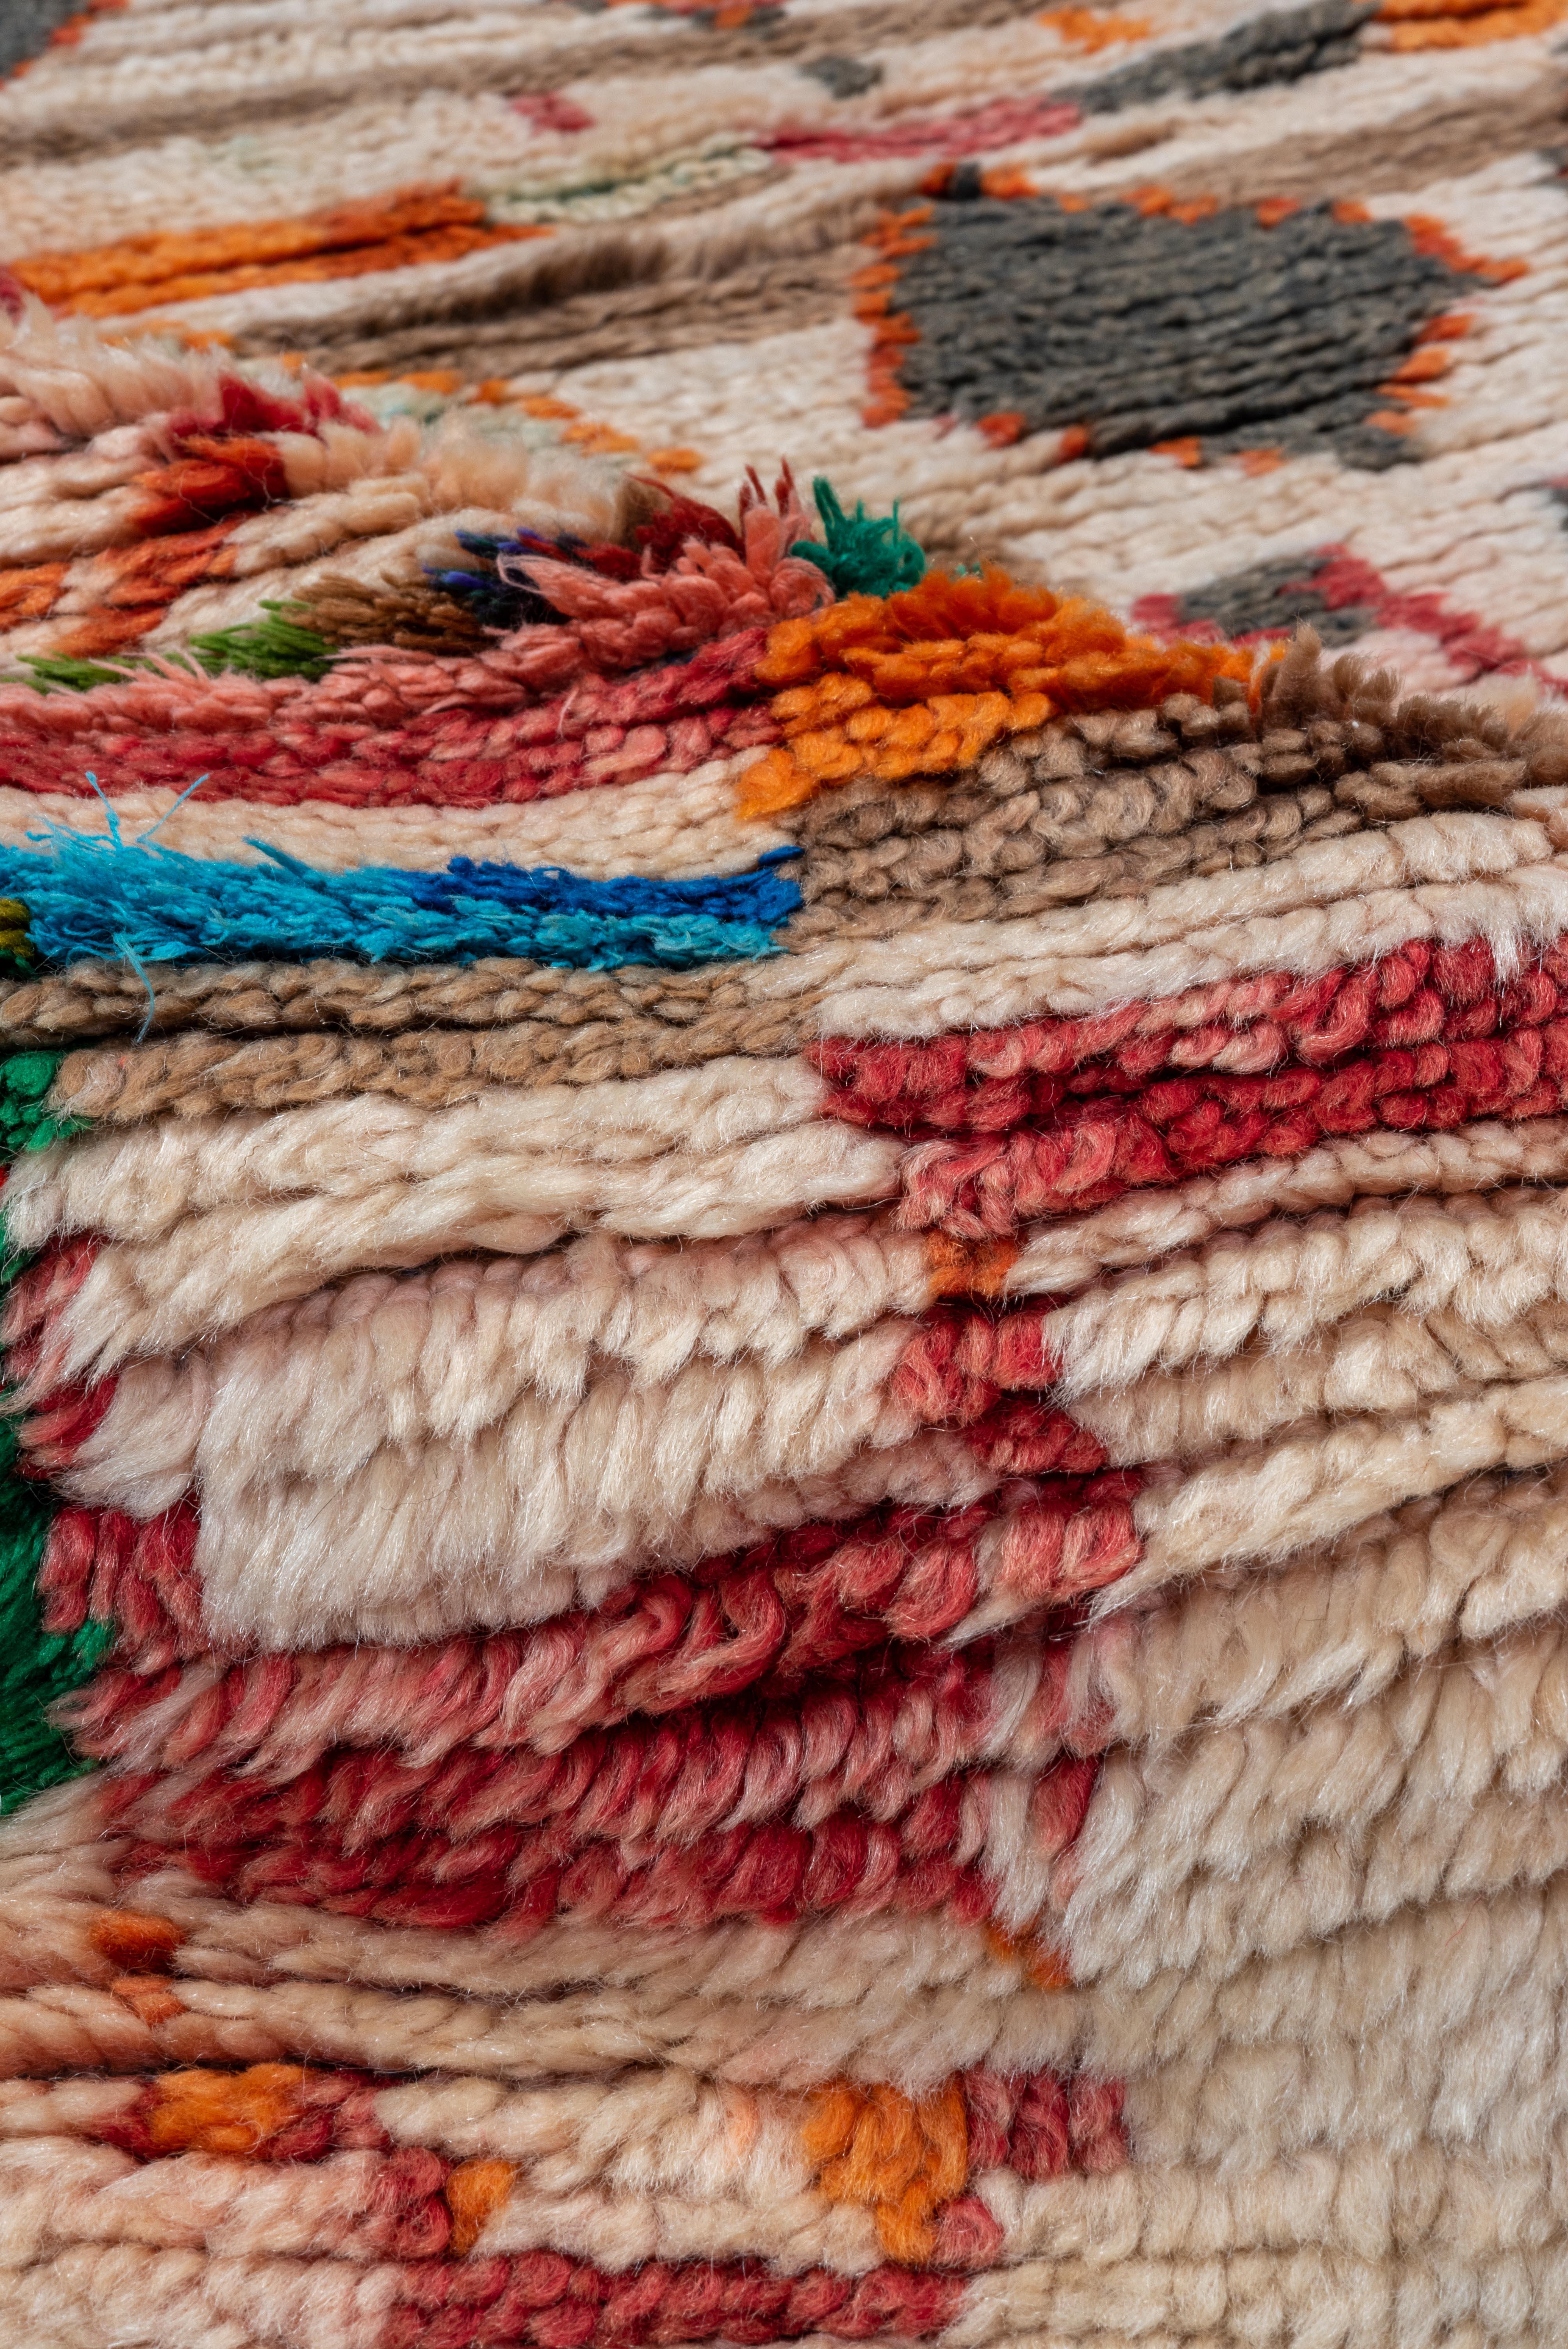 Village woven from memory, patterns used are passed down through generations within villages and Tribal groups.